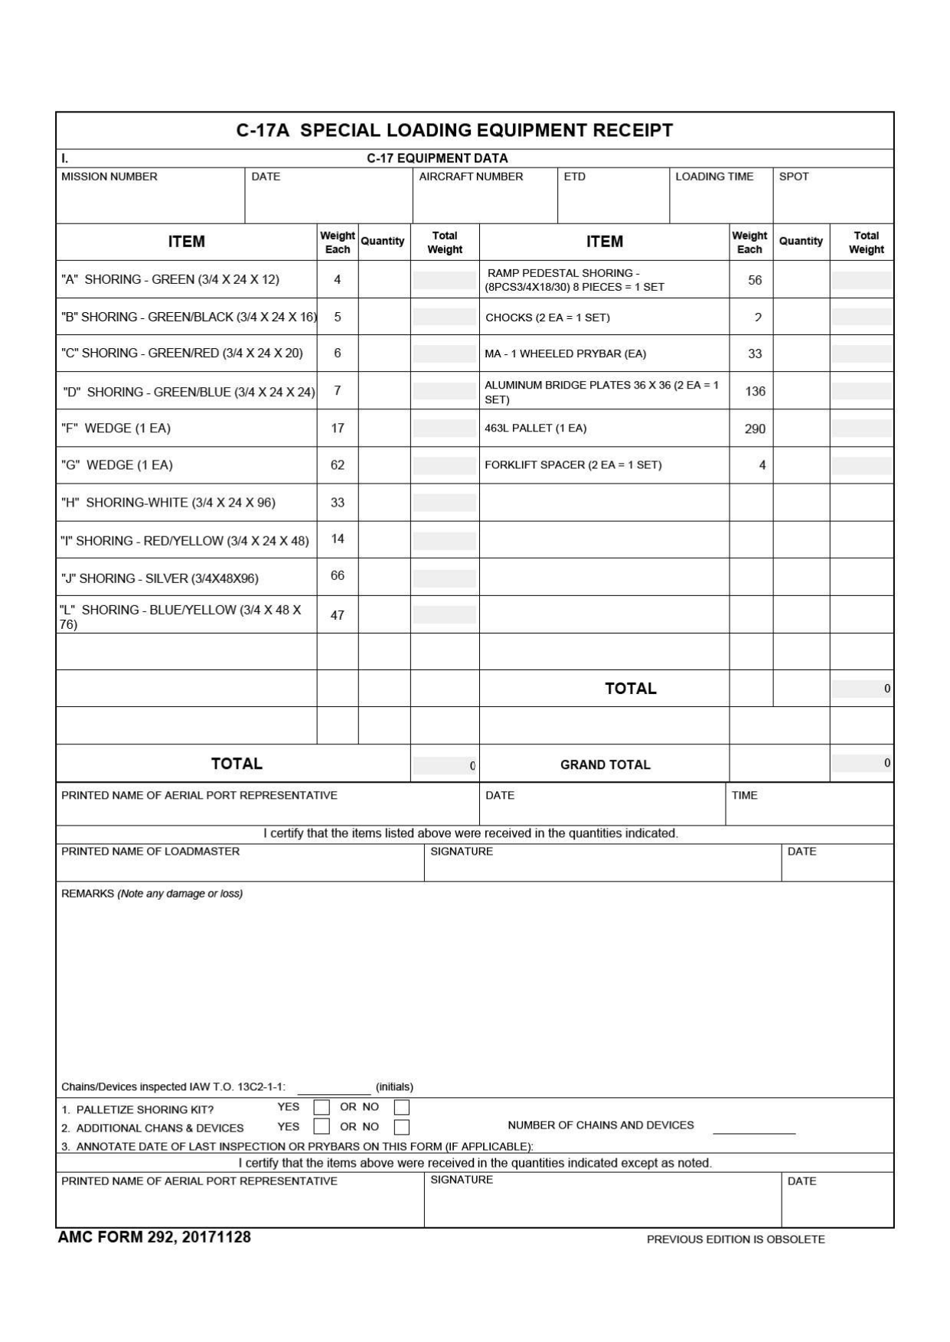 AMC Form 292 C-17a Special Loading Equipment Receipt, Page 1